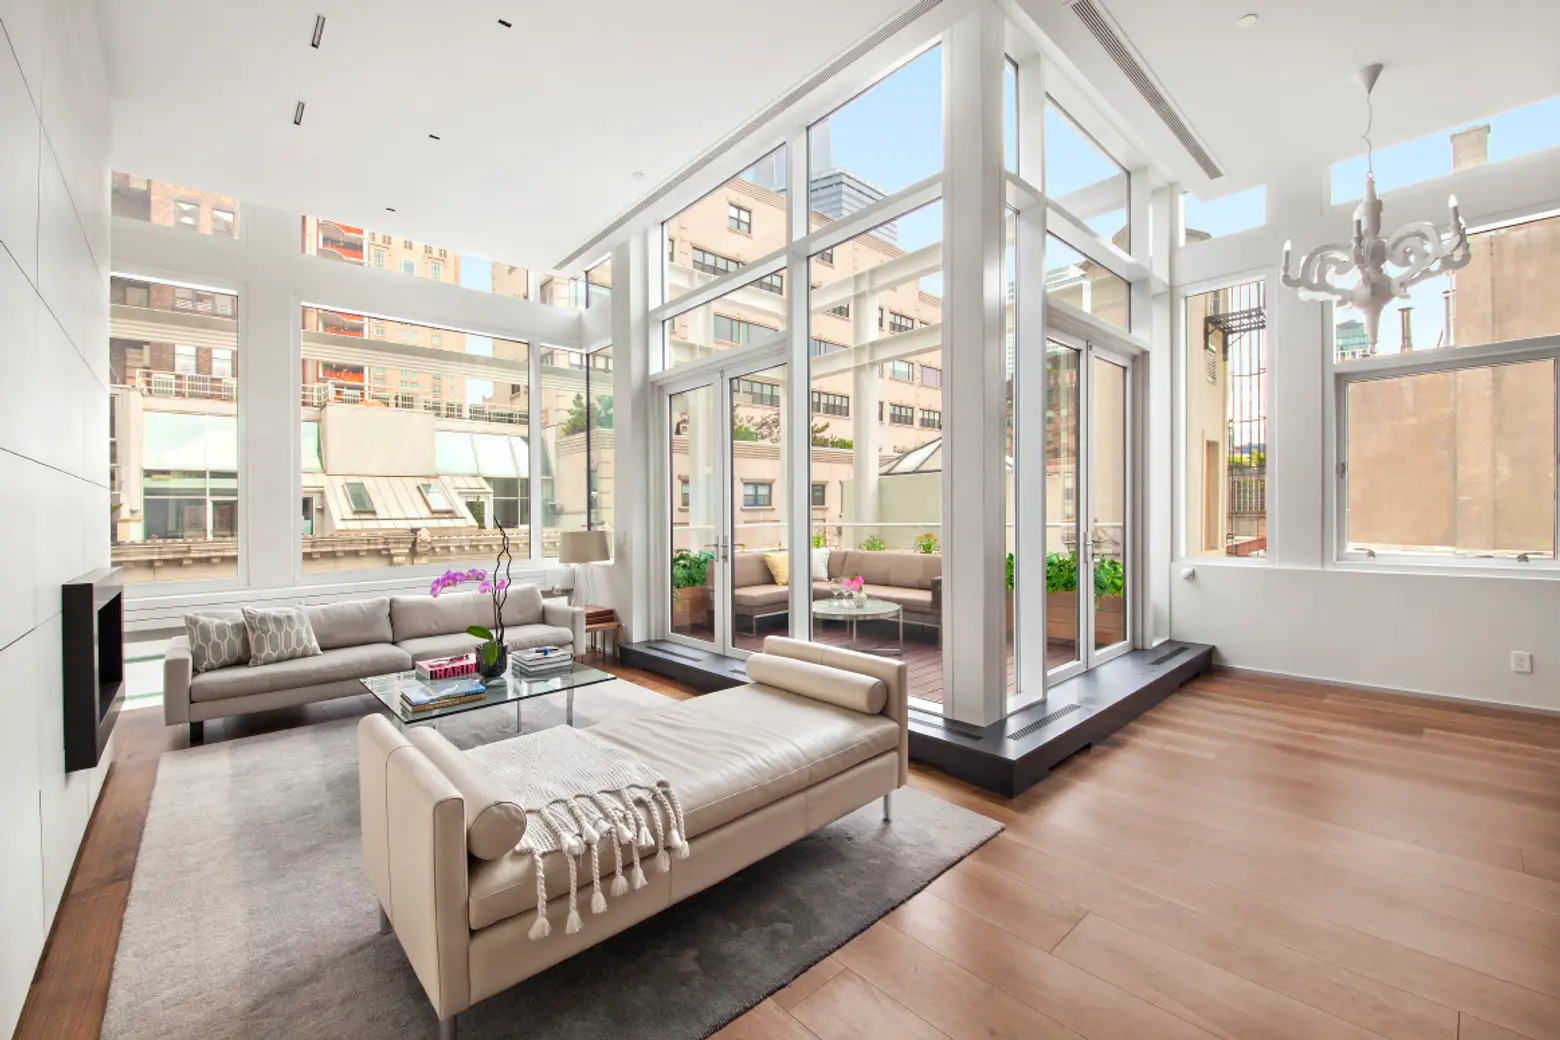 Tribeca Triplex Penthouse With Rooftop Hot Tub Swaps Astroturf for Ipe Wood and Asks $8M